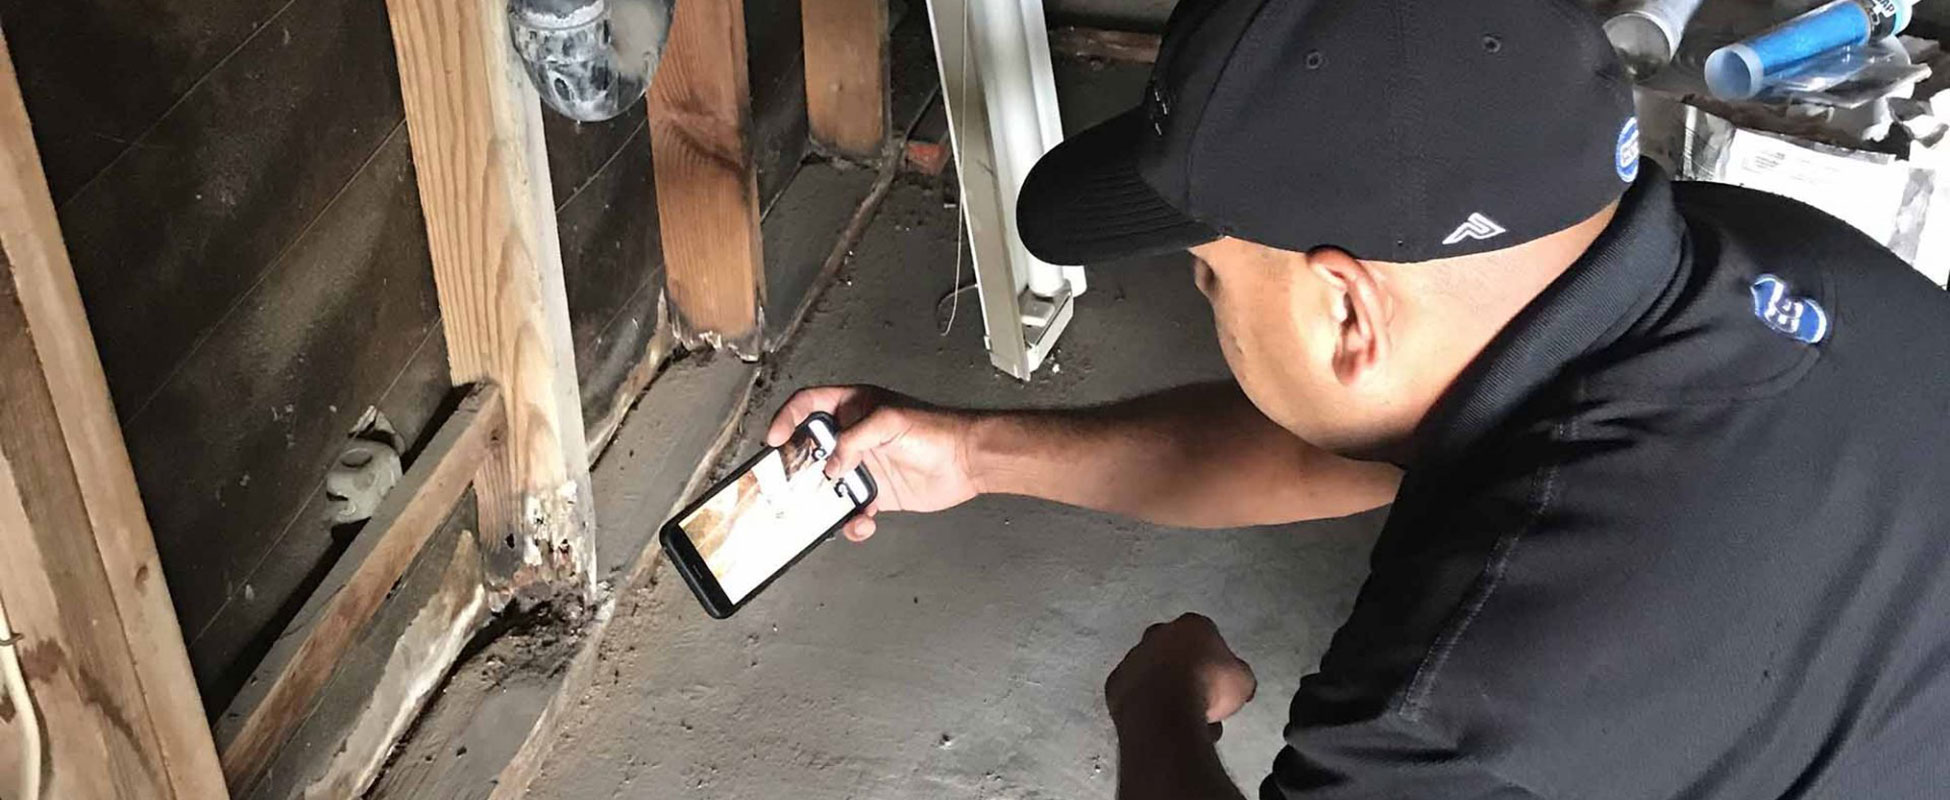 home inspections los angeles - property inspections, termite inspections, roof inspections - Elite Group Inspection Professionals (5)